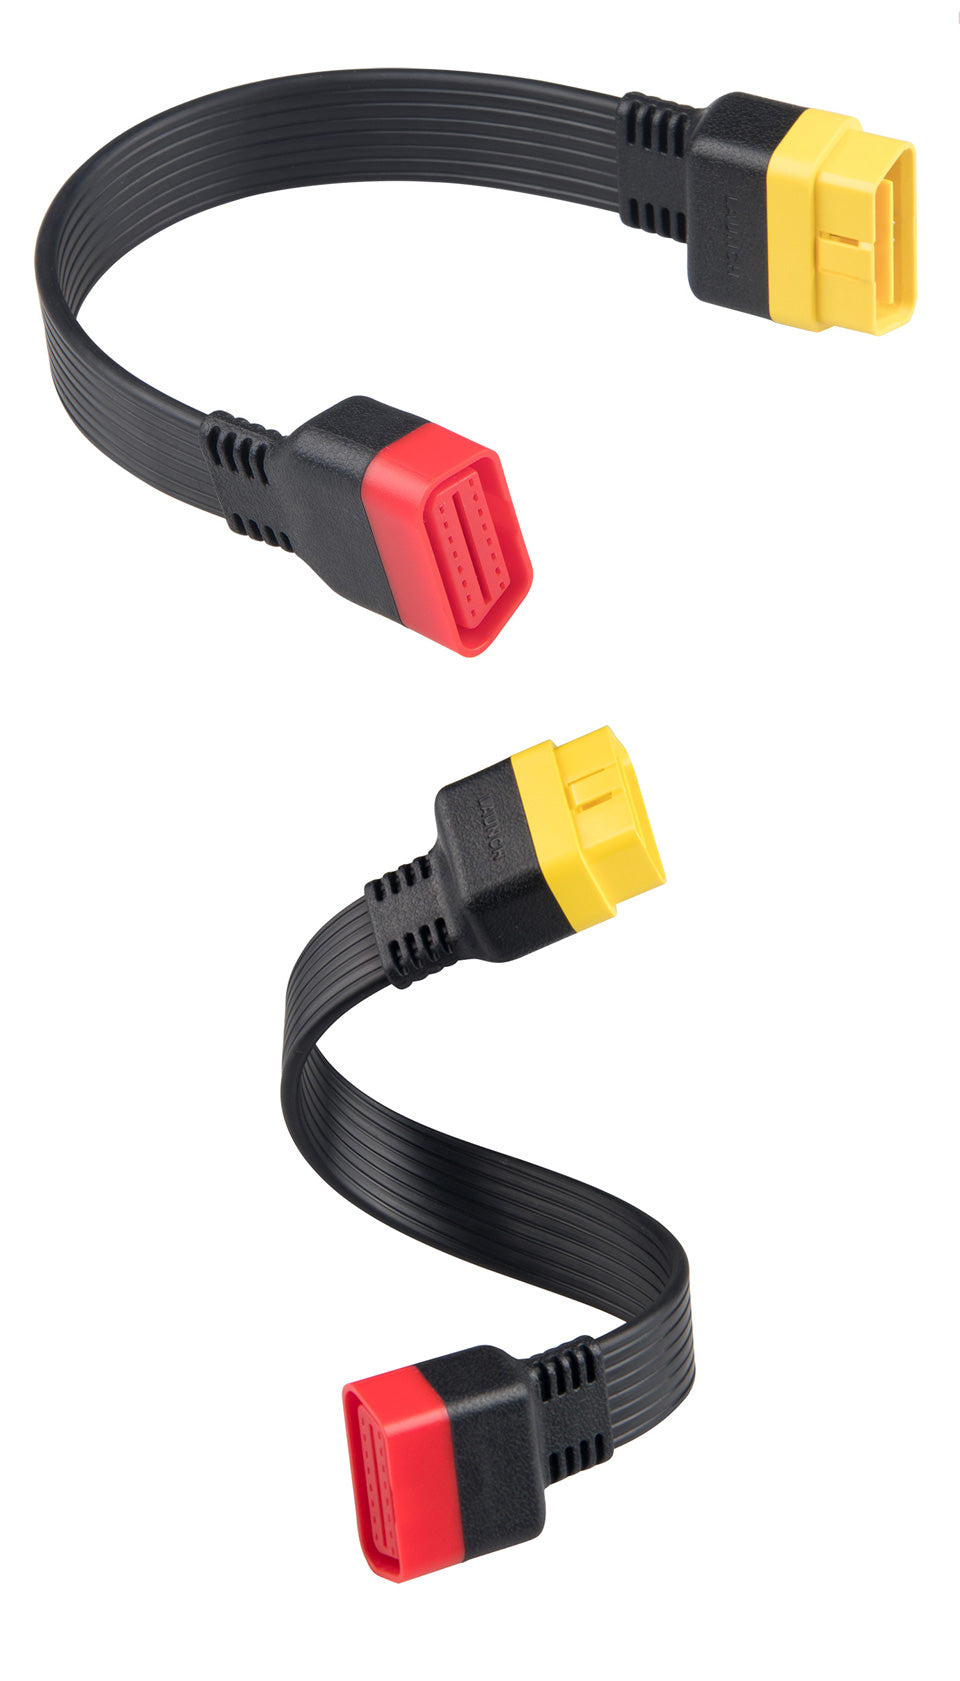 obd2 extension cable for launch x431 idiag